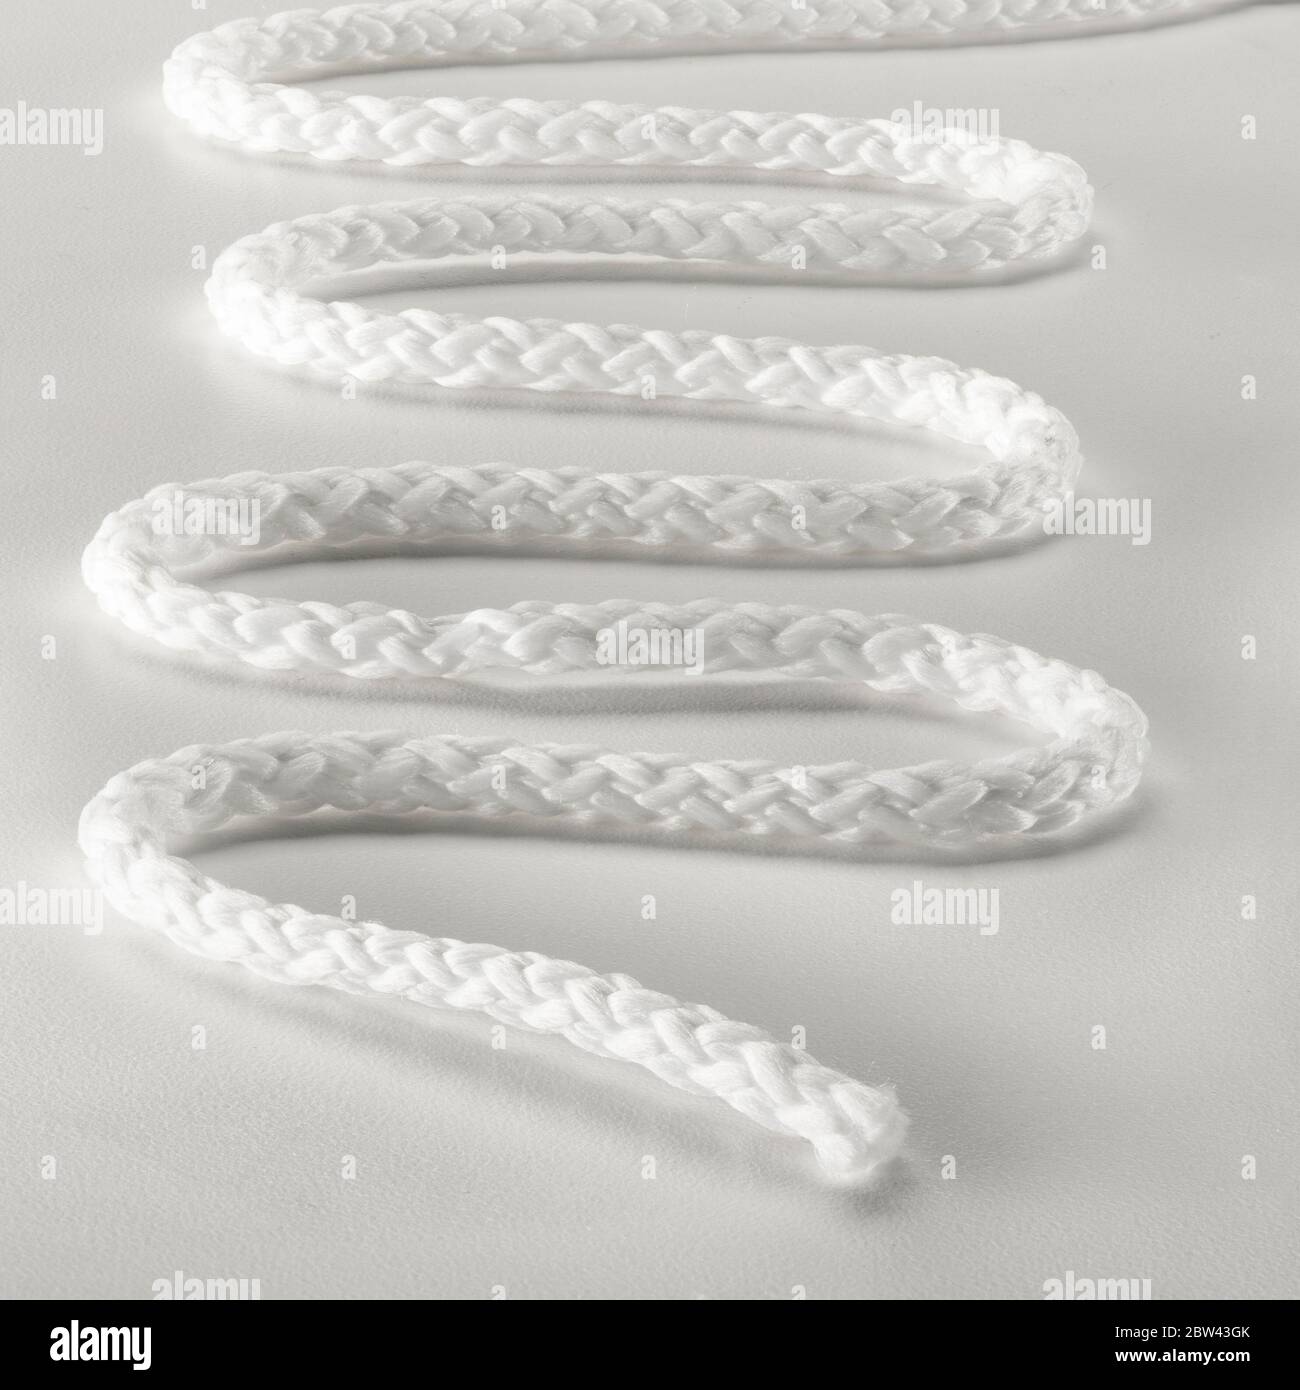 White string placed in serpentine pattern Stock Photo